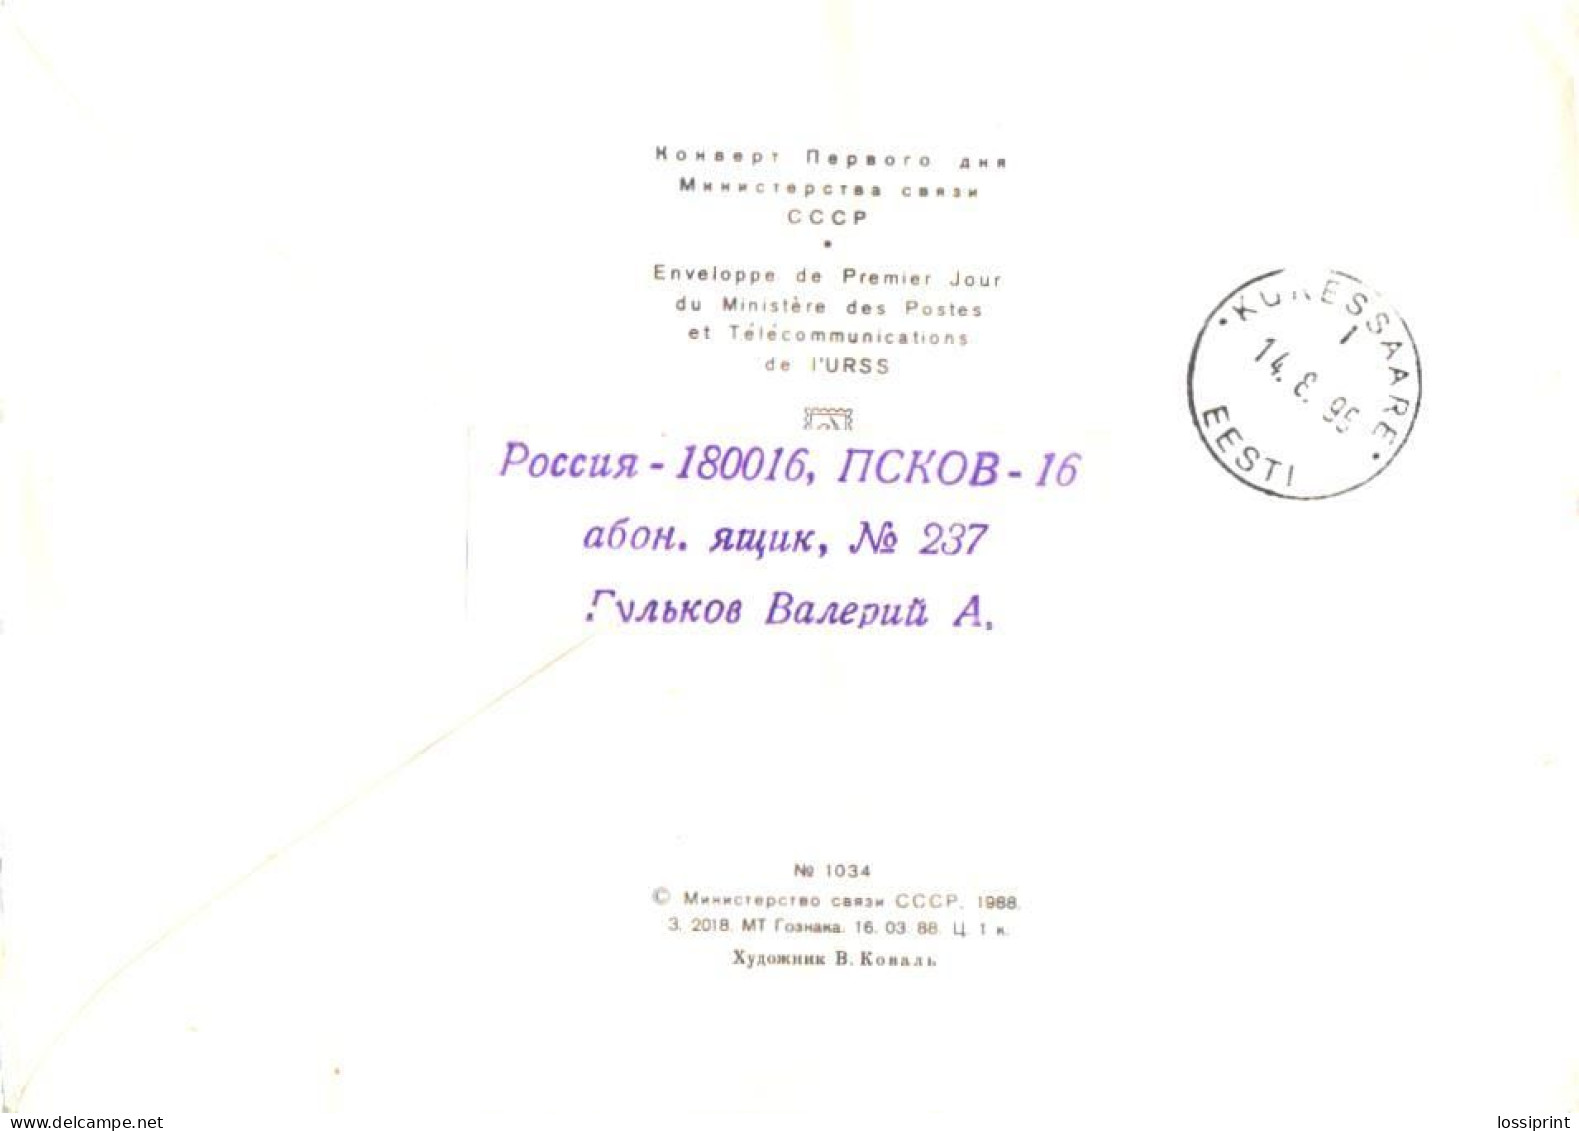 Russia:Letter With Overprinted Russian Stamps To Estonia 1995 - Covers & Documents